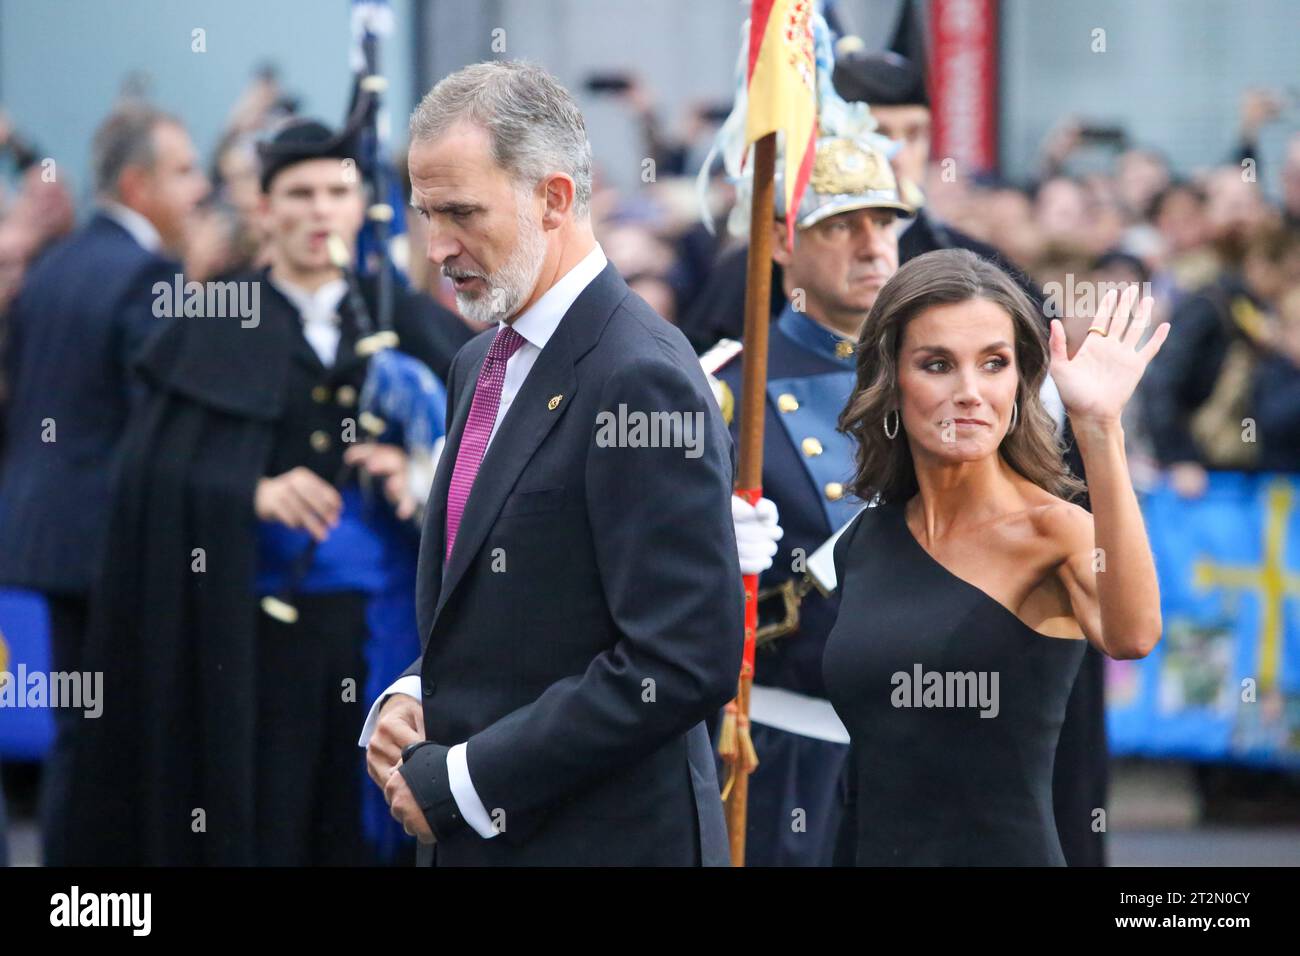 Oviedo, Asturias, October 20th, 2023: The Kings of Spain, Felipe VI (L) and Letizia Ortiz (R) during the Blue Carpet of the Princess Awards 2023, on October 20, 2023, in Oviedo, Spain. Credit: Alberto Brevers / Alamy Live News. Stock Photo